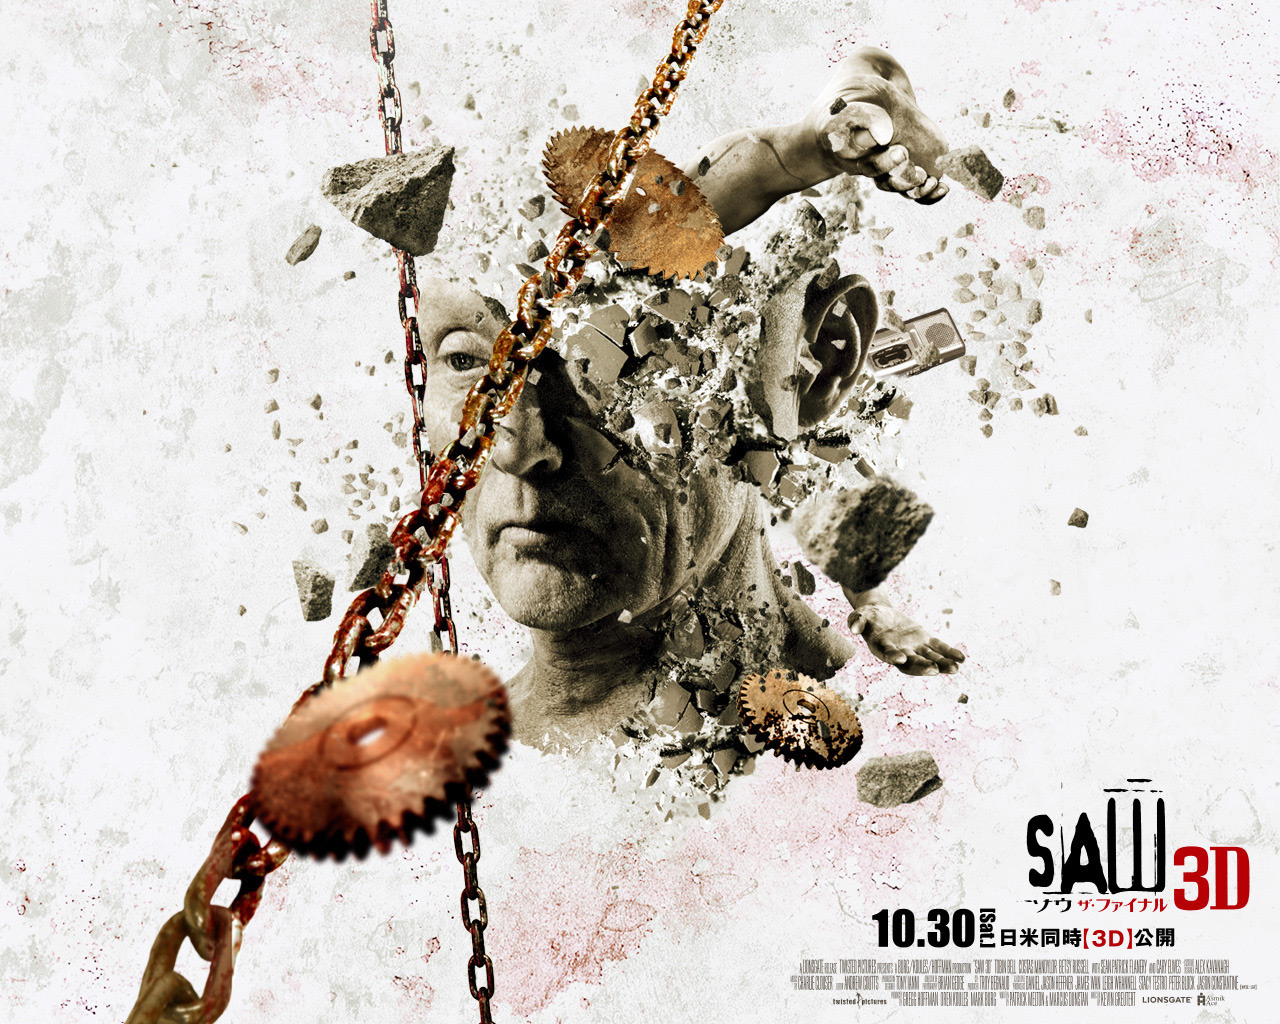 Free download Wallpaper of SAW 1 SAW 2 SAW 3 SAW 4 SAW 5 SAW 6 and SAW 3D [1280x1024] for your Desktop, Mobile & Tablet. Explore Saw 6 Wallpaper. Saw 6 Wallpaper, Saw Movie Wallpaper, M249 SAW Wallpaper